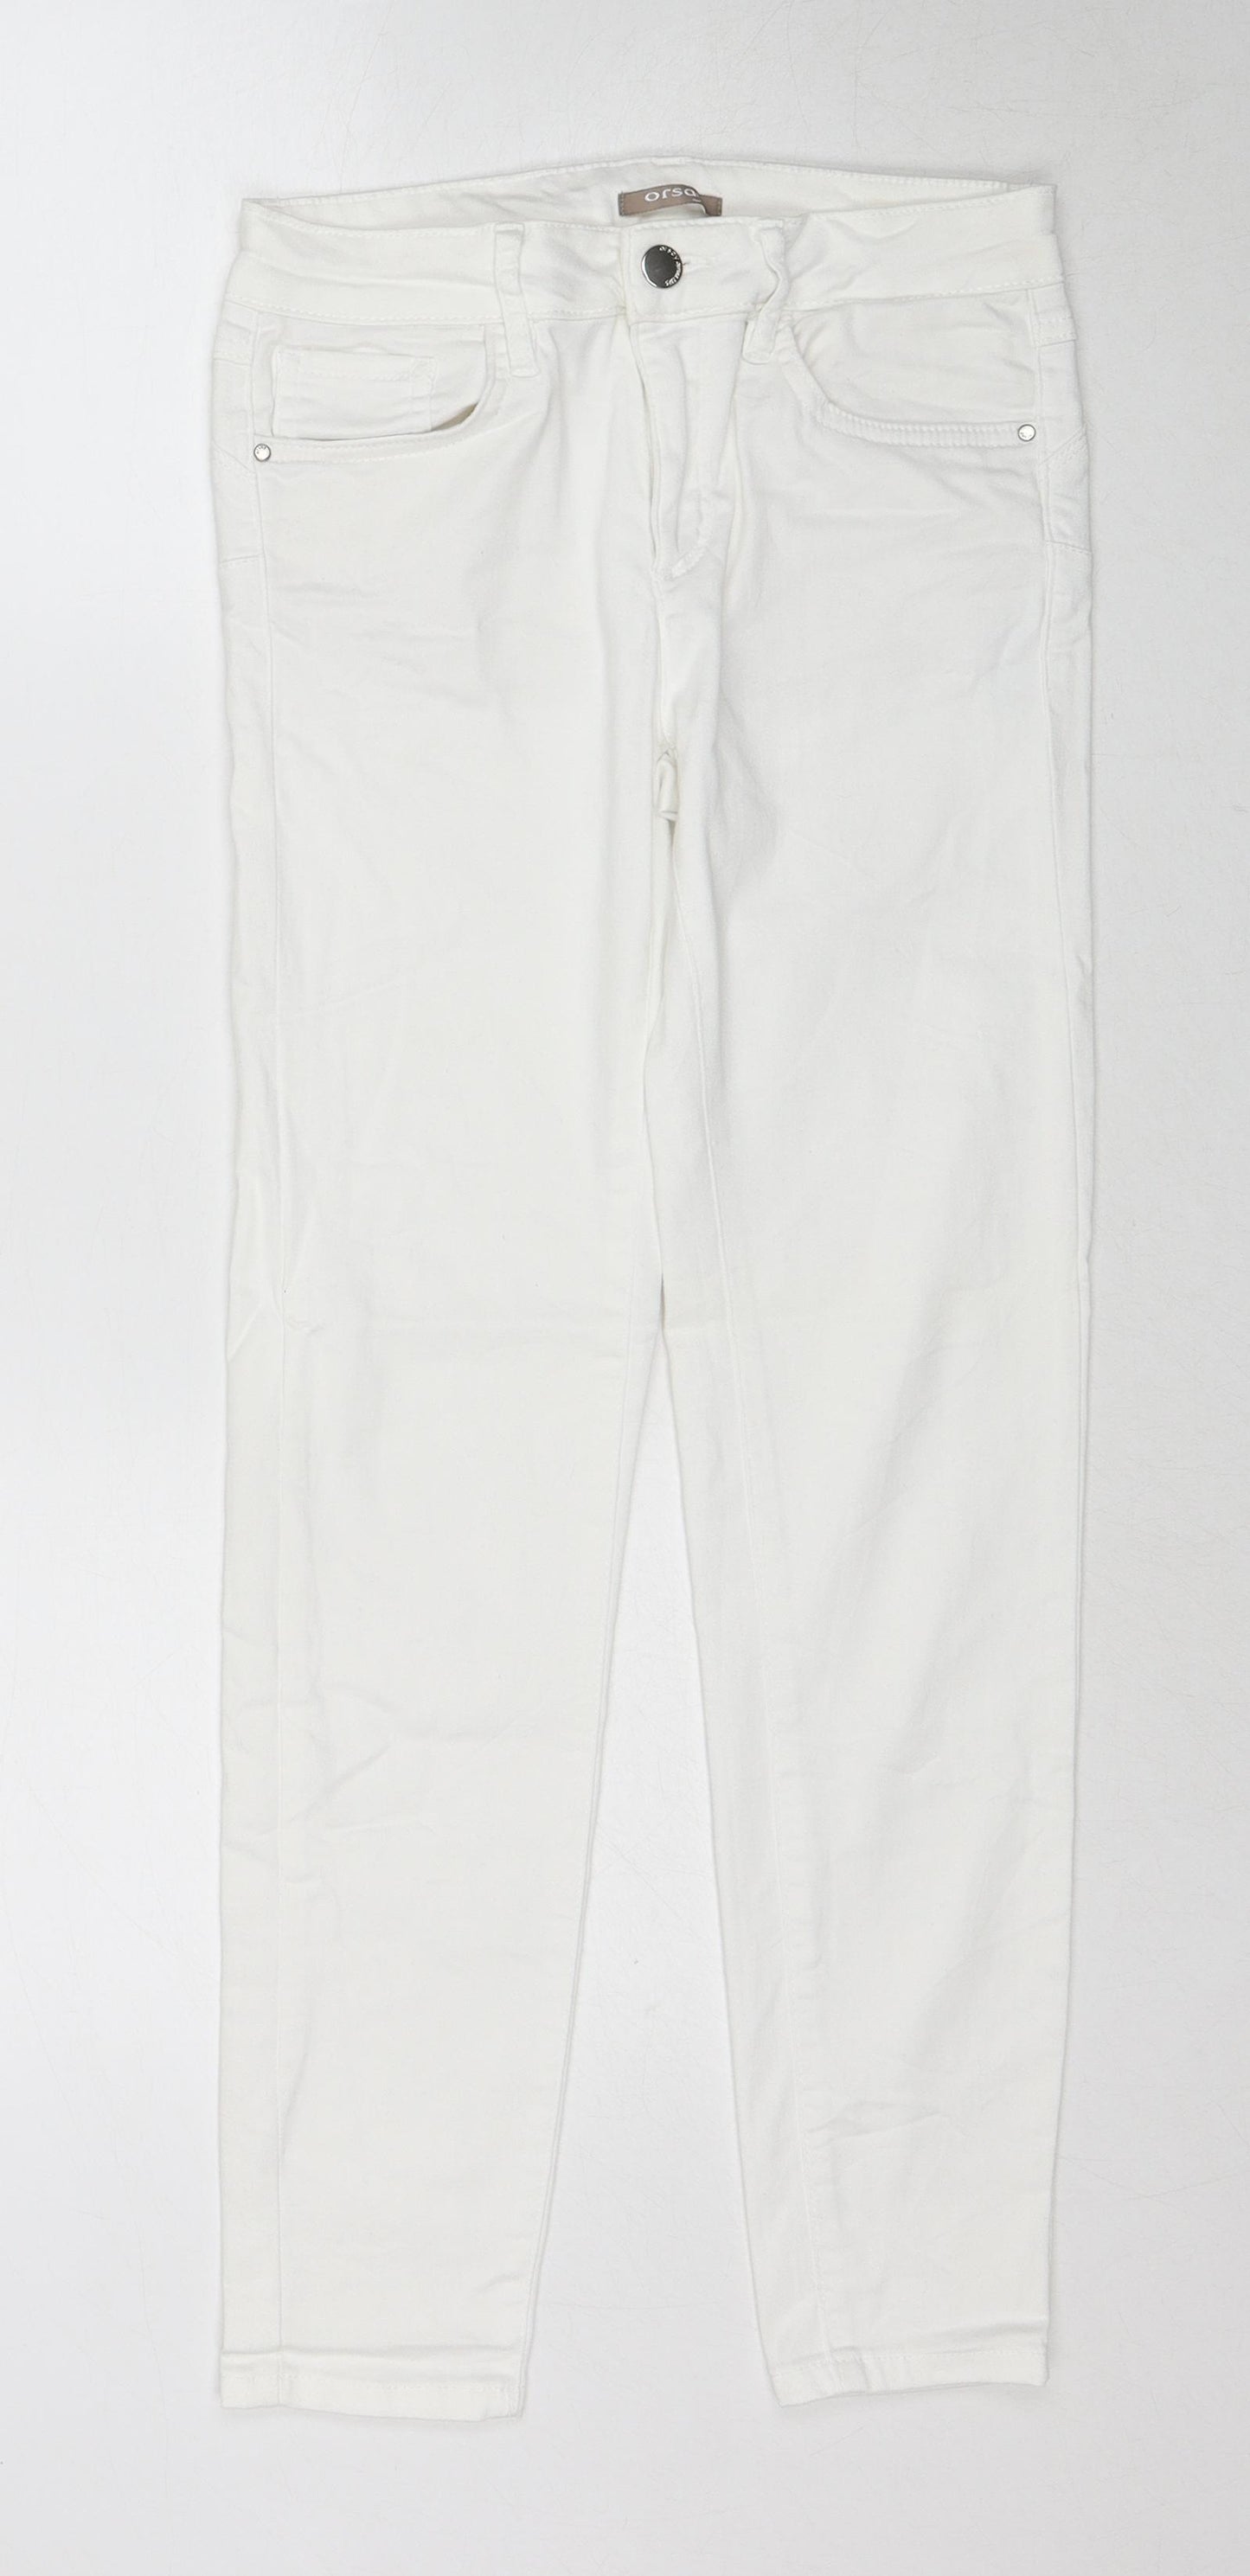 ORSAY Womens White Cotton Straight Jeans Size 6 Regular Zip